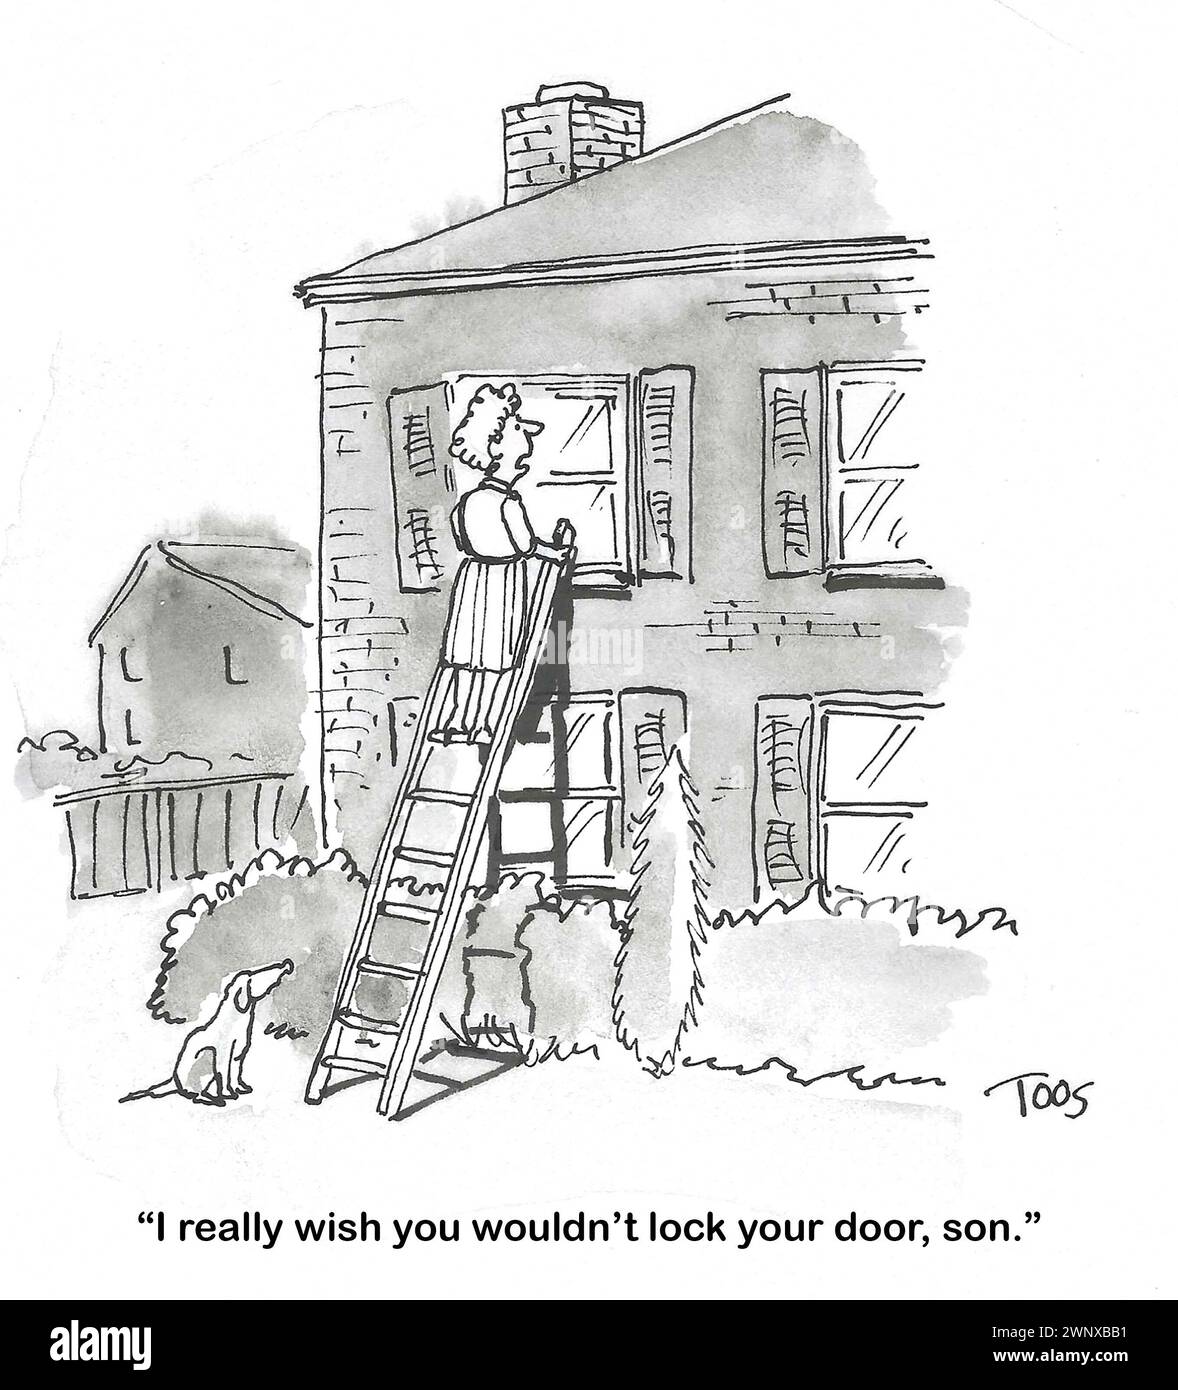 BW cartoon of a Mother climbing a ladder up to her son's 2nd floor window and saying please do not lock your door. Stock Photo